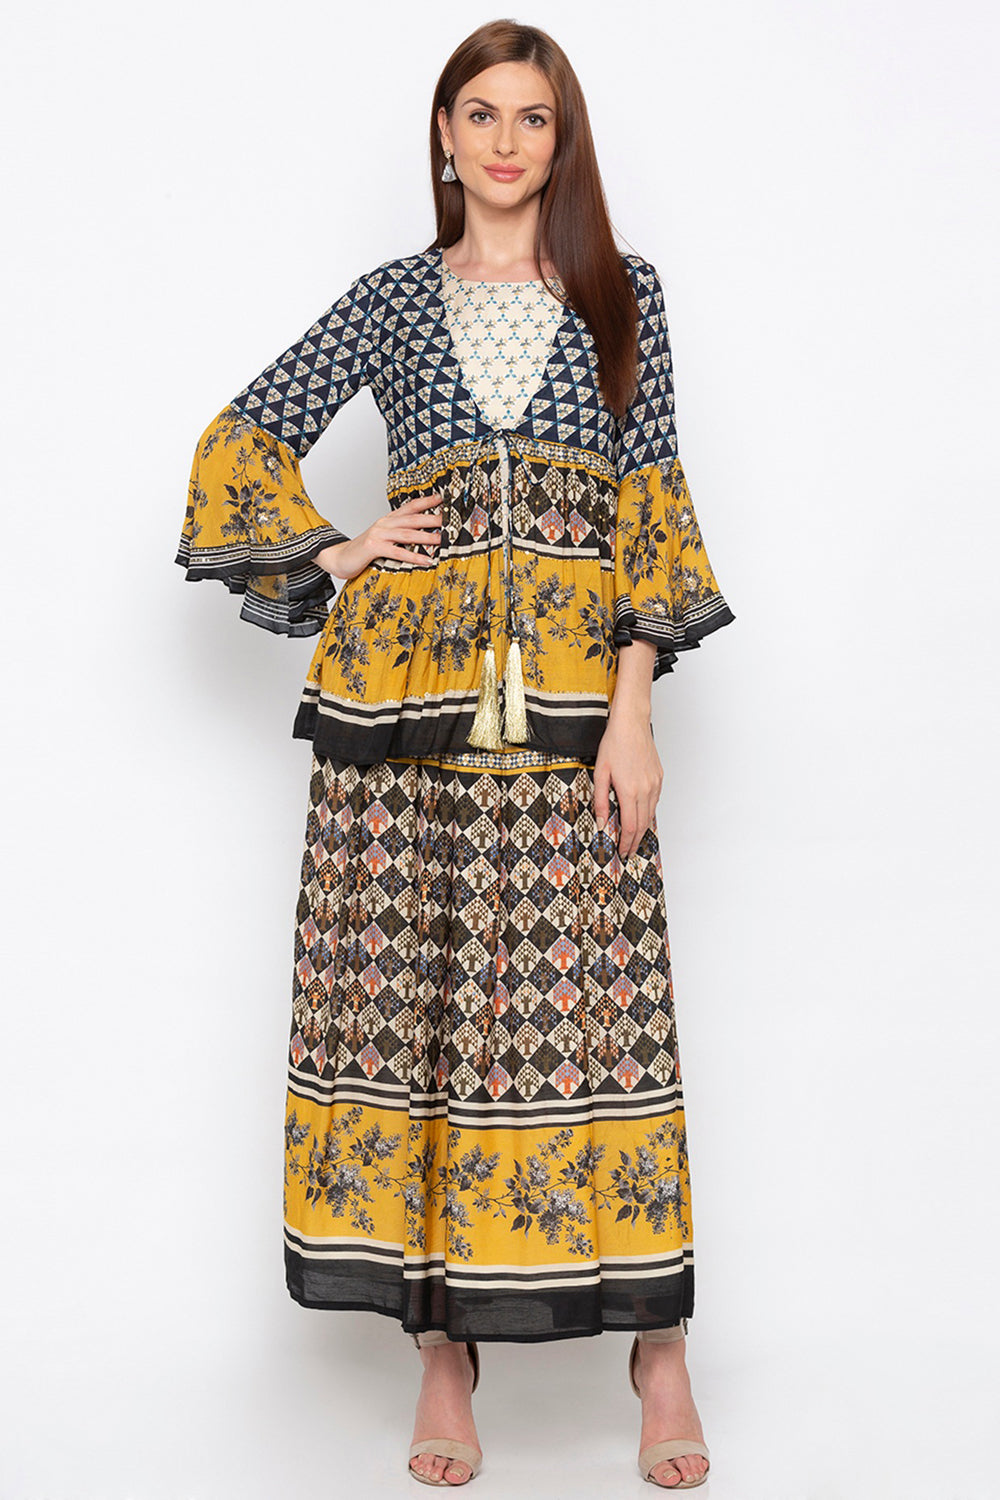 Applique Printed Dress With Jacket